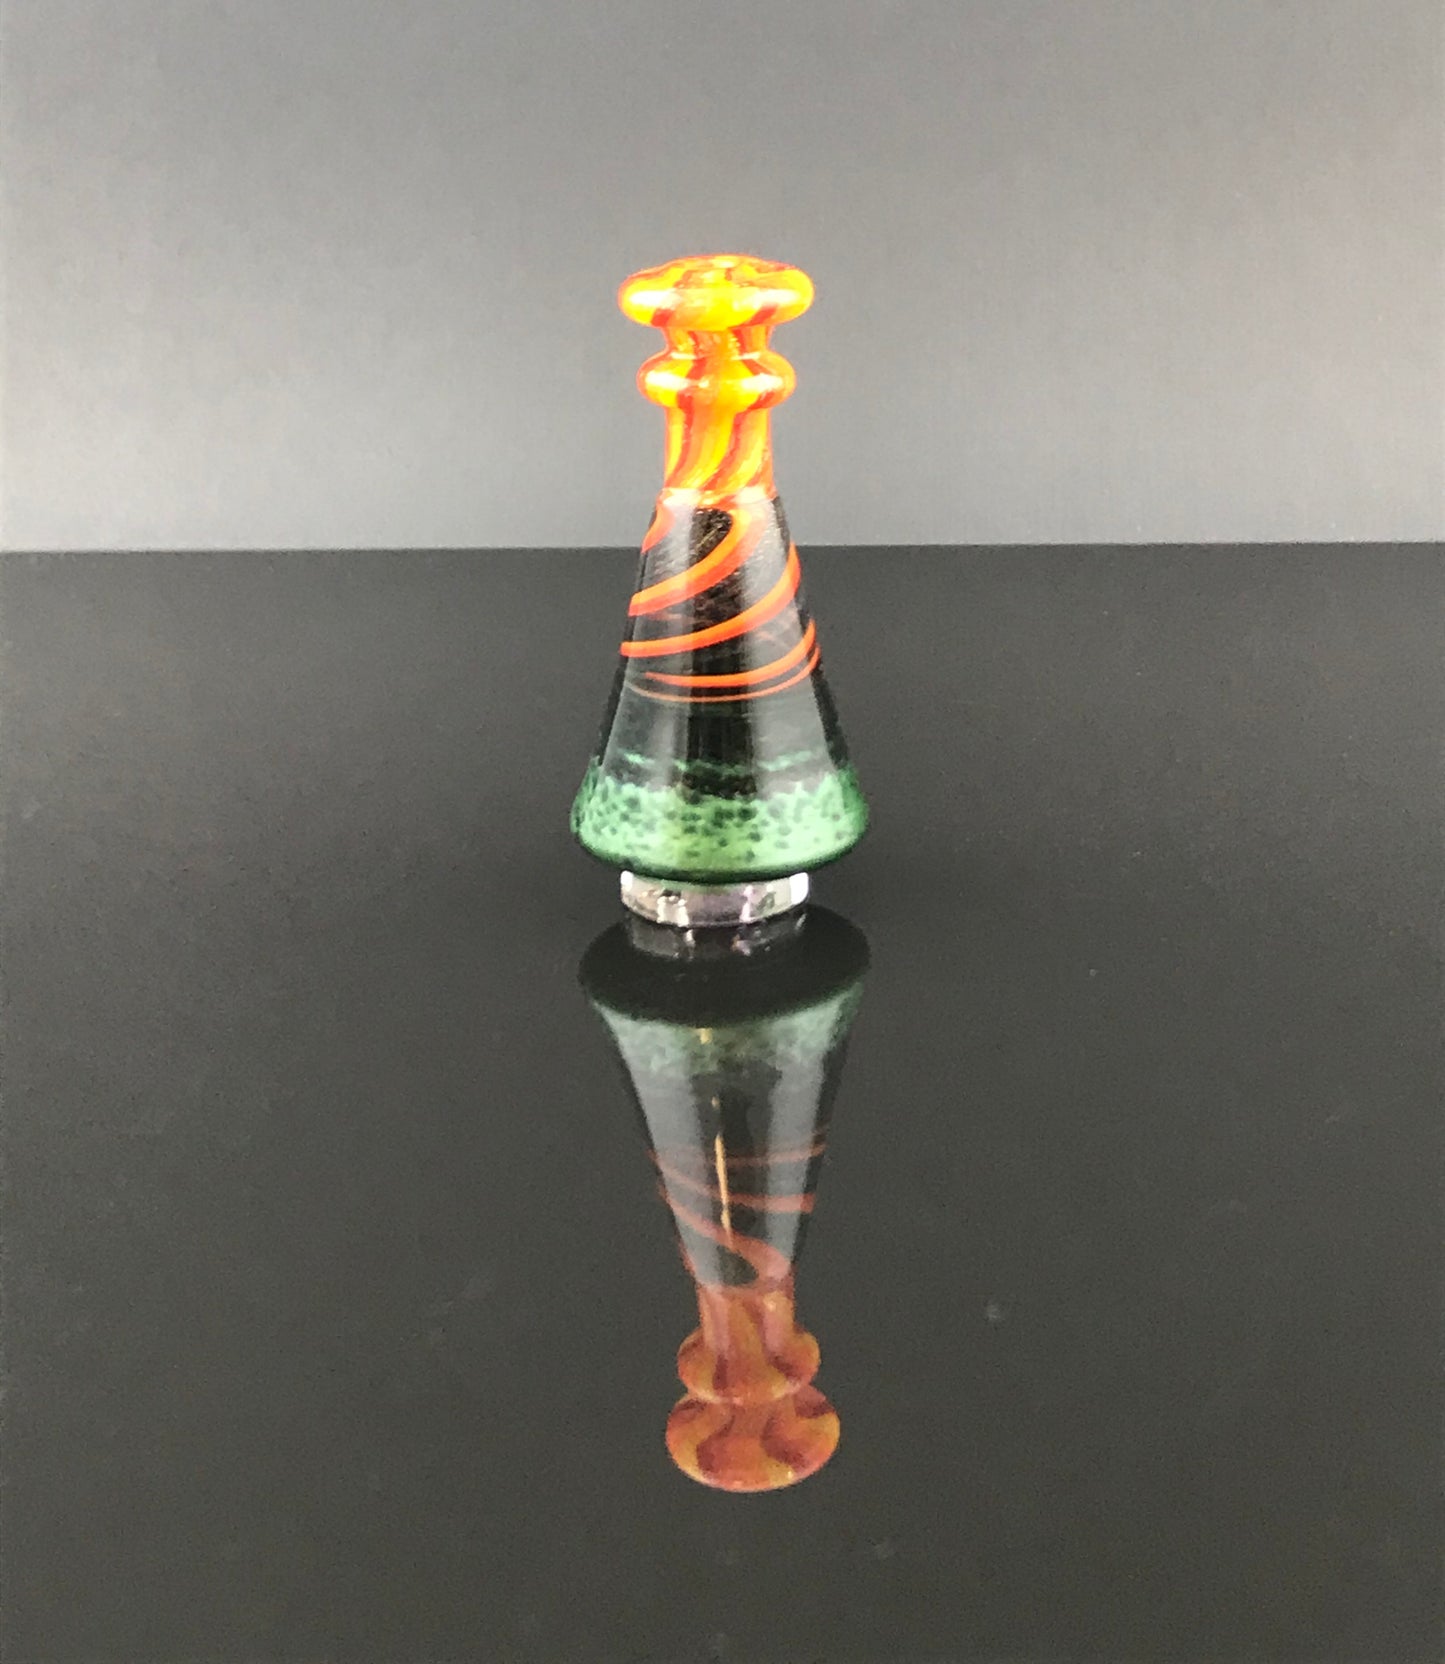 Volcano Spinner Carb Cap 1